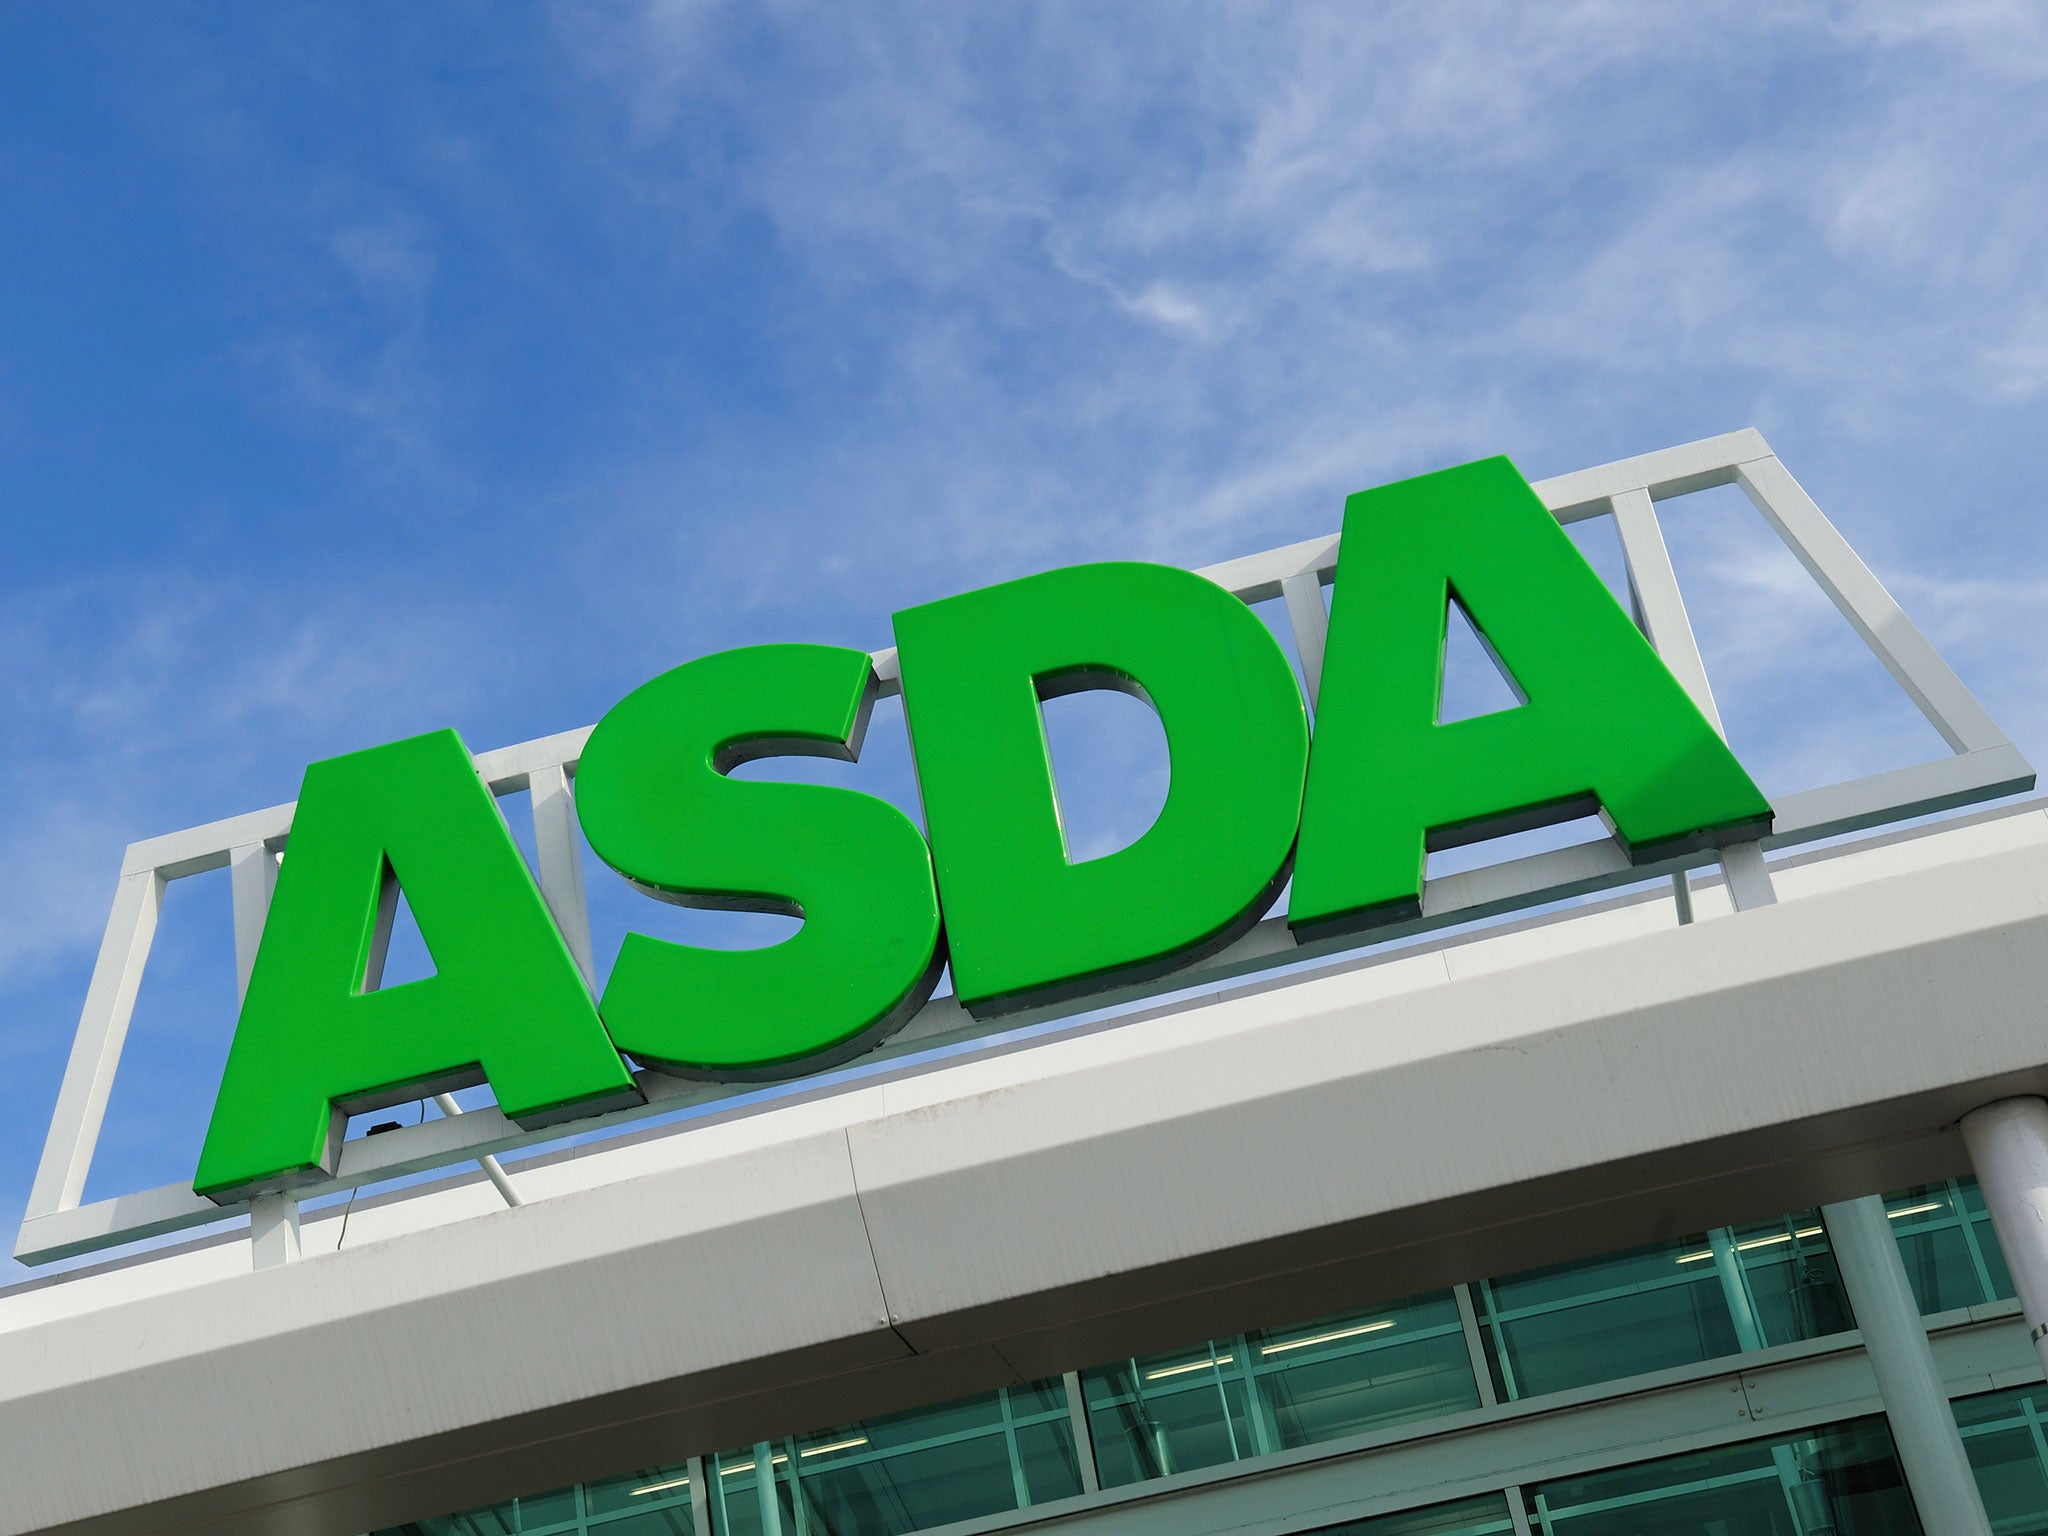 Asda and its rivals Tesco, Sainsbury’s and Morrison’s have struggled to compete with German discounters Aldi and Lidl